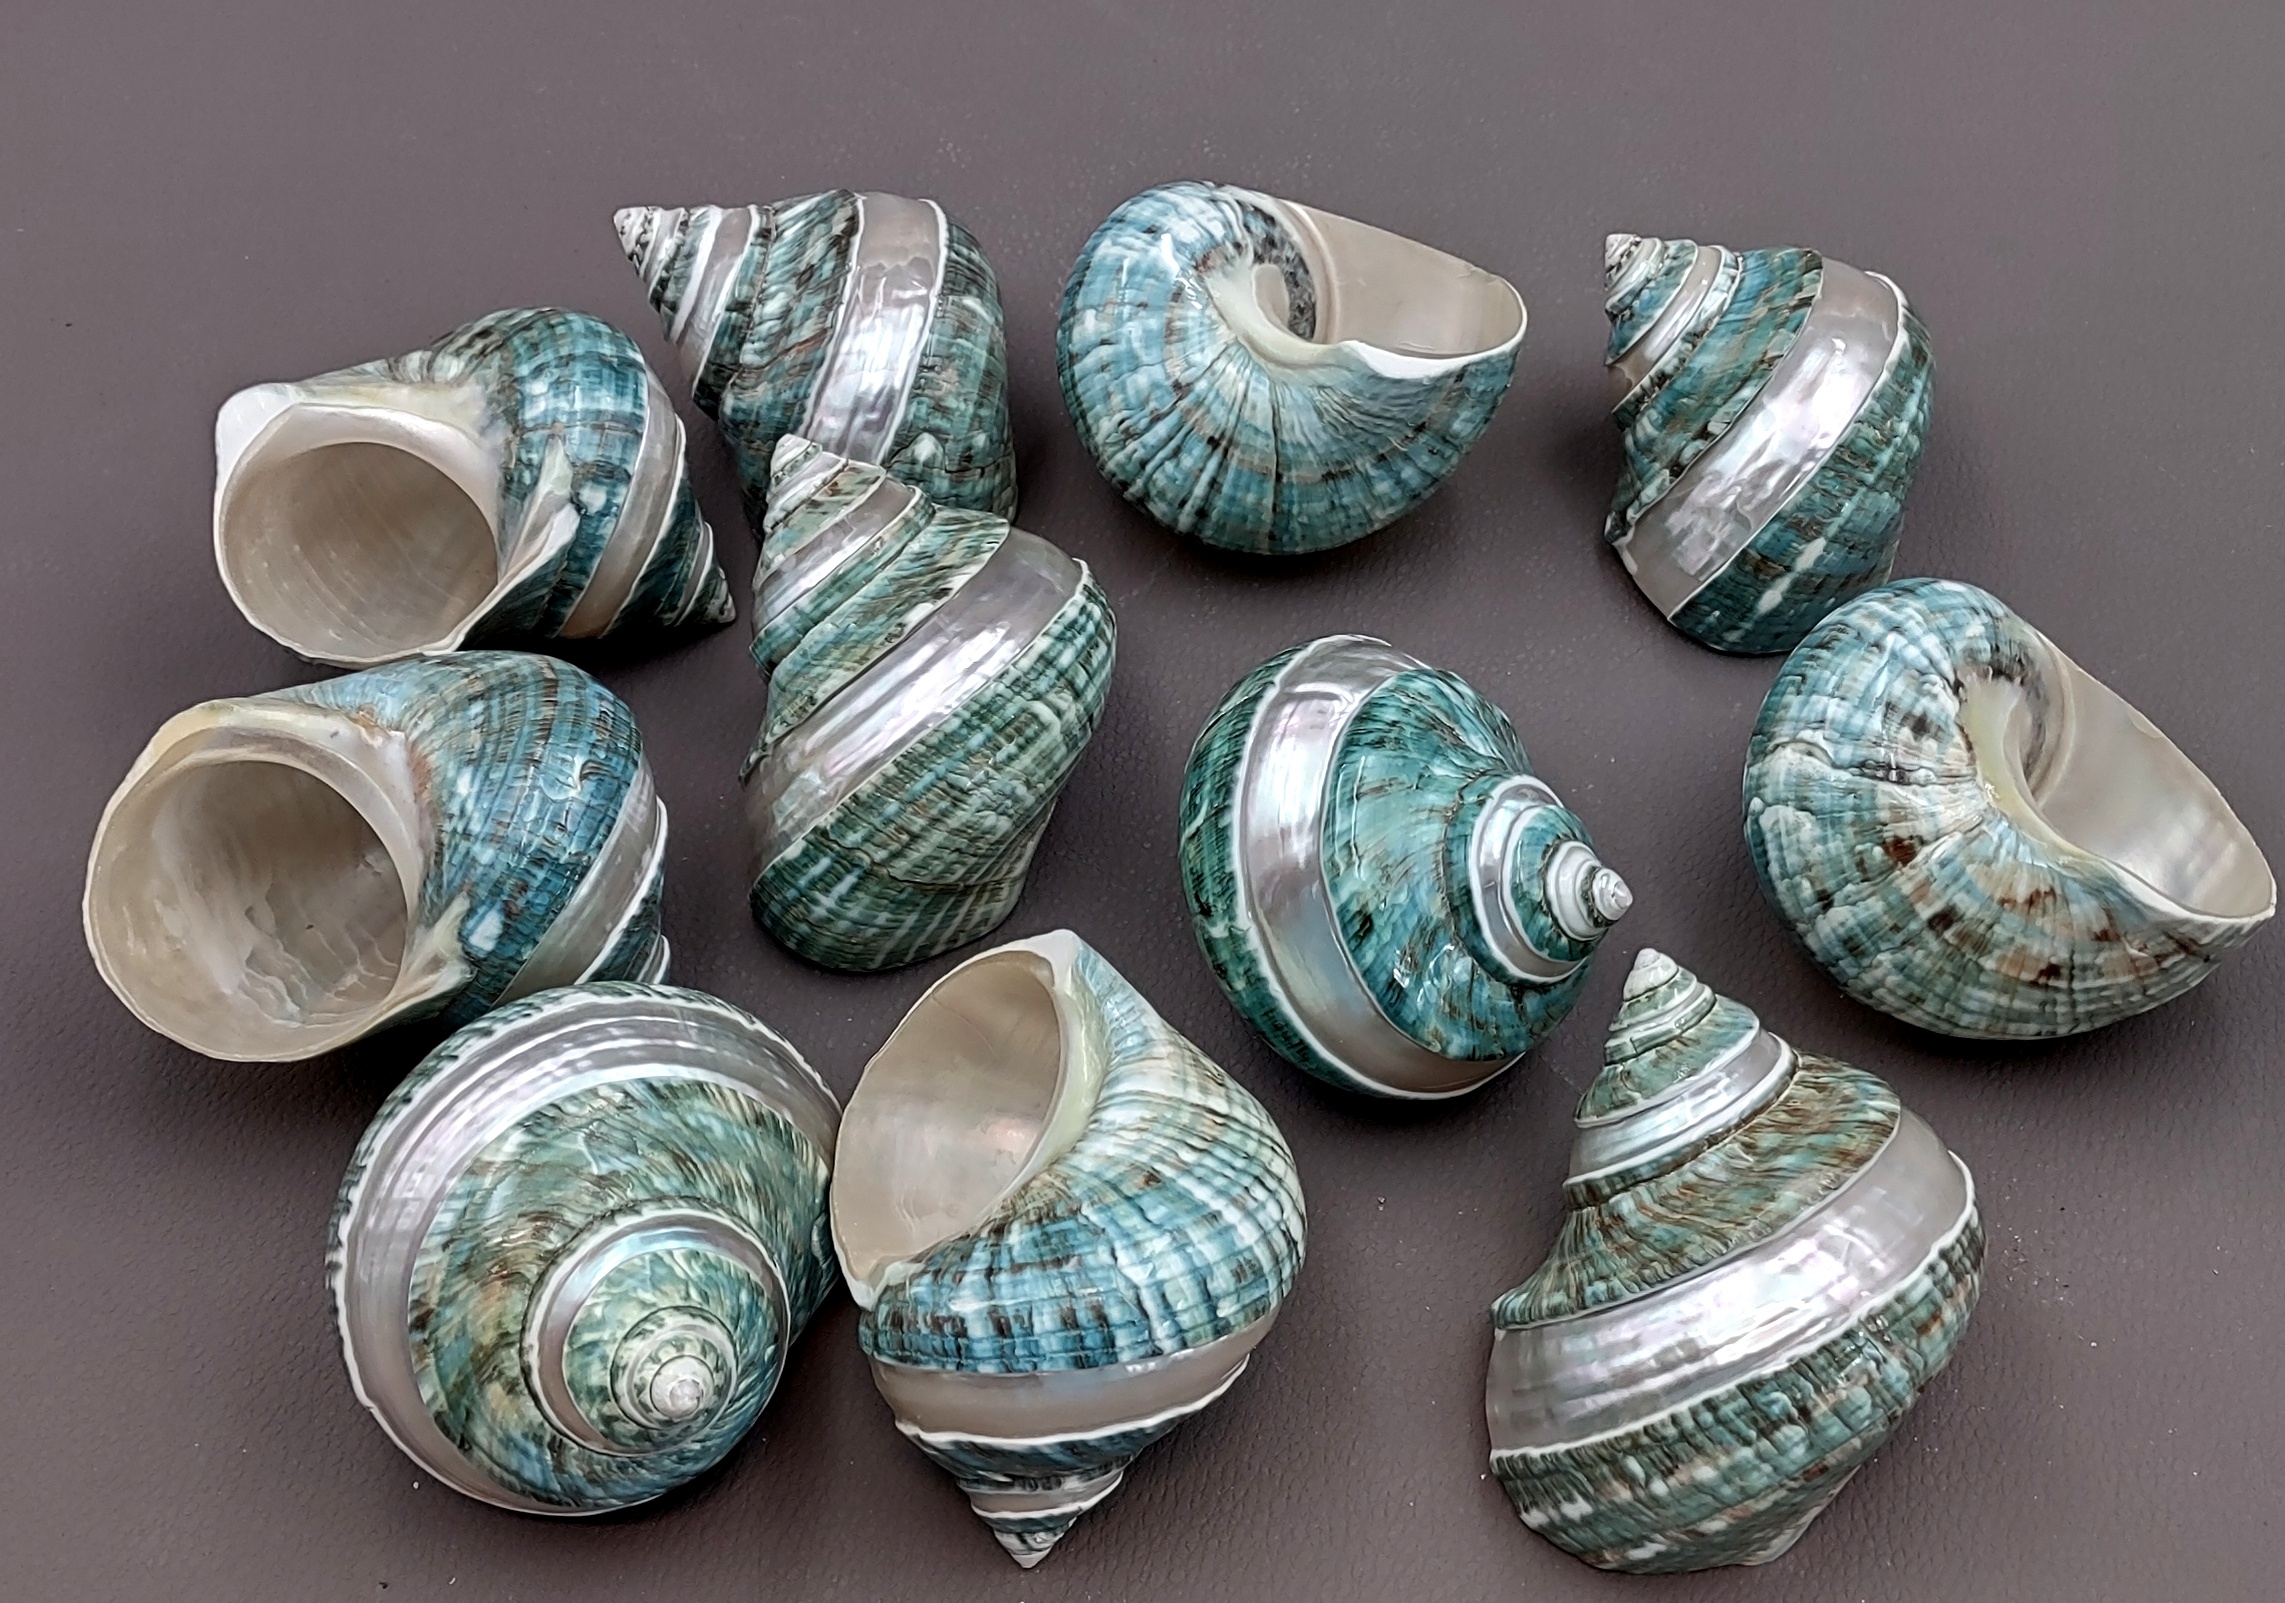 Jade Green Turbo Sea Shells Turbo Brunneus (10 shells approx. 1-2 inches)  Natural Green Shells for Hermit Crab Home, Display & Collecting!